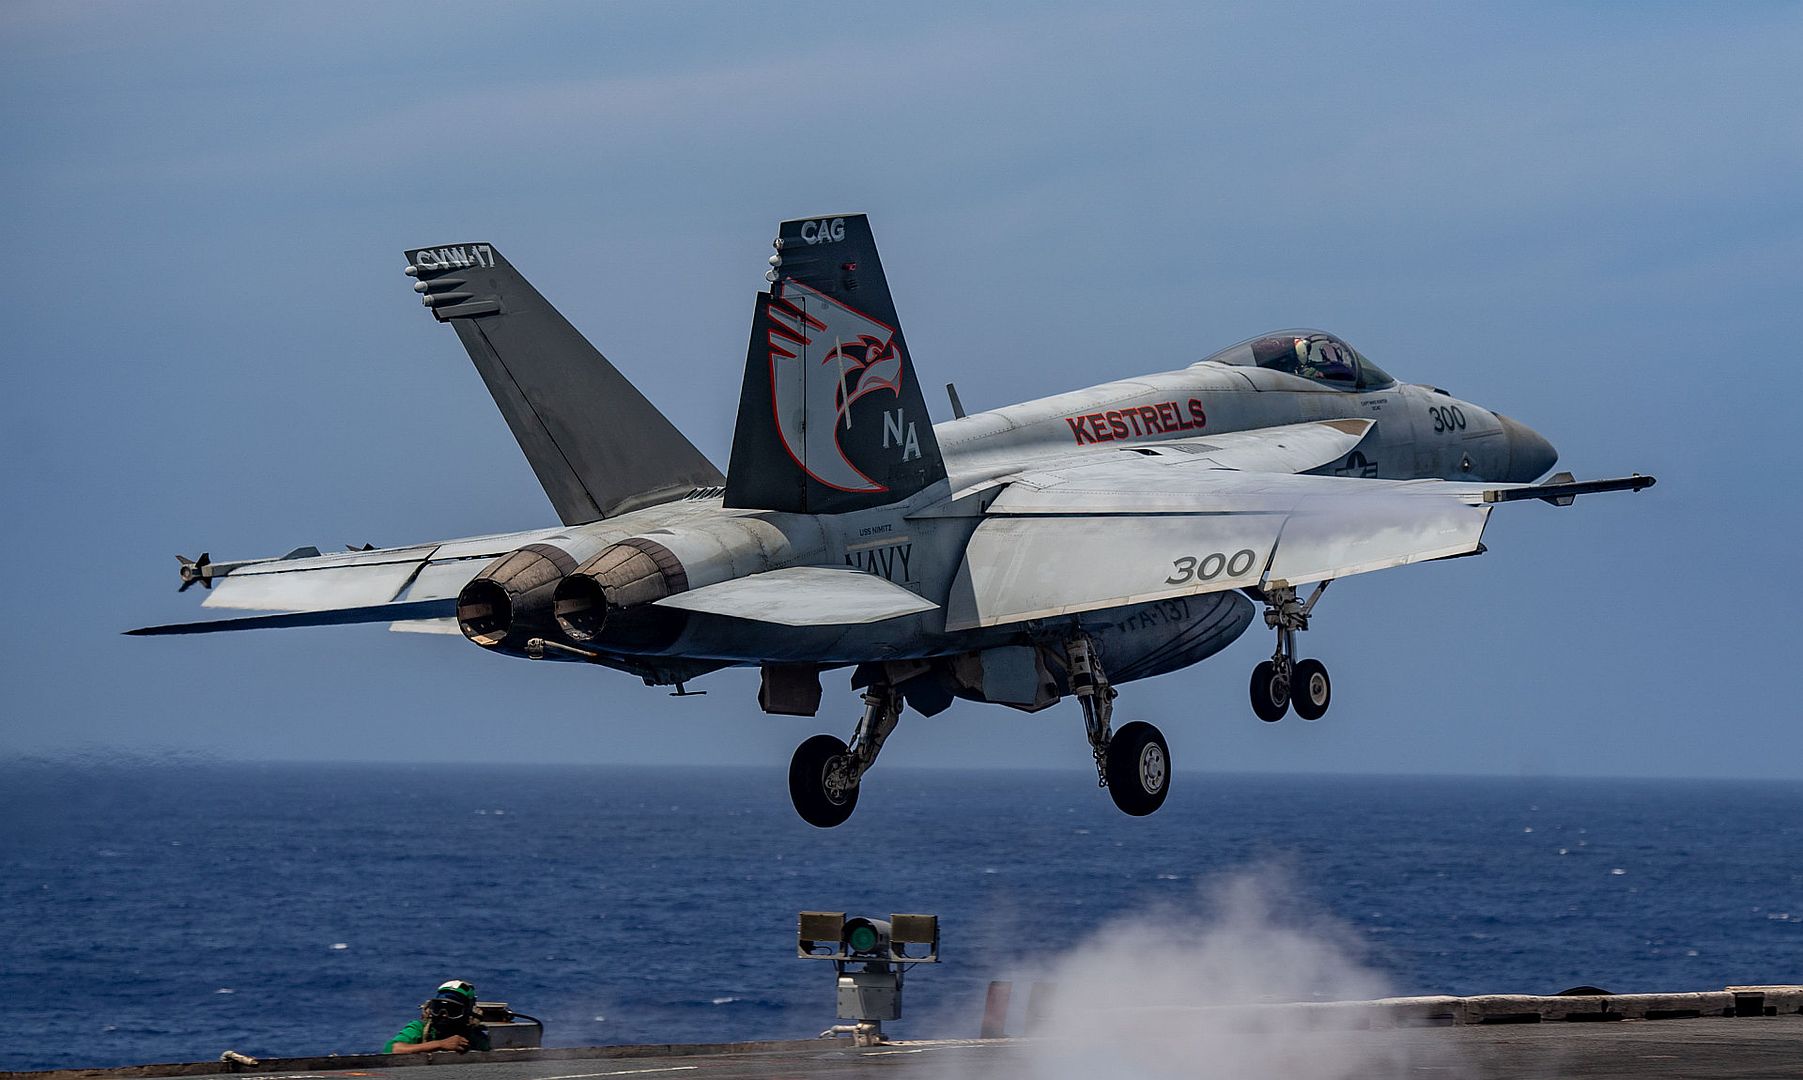  137 Launches From The Flight Deck Of The Aircraft Carrier USS Nimitz 6bAa5huoKmsb1gSy8LuRak